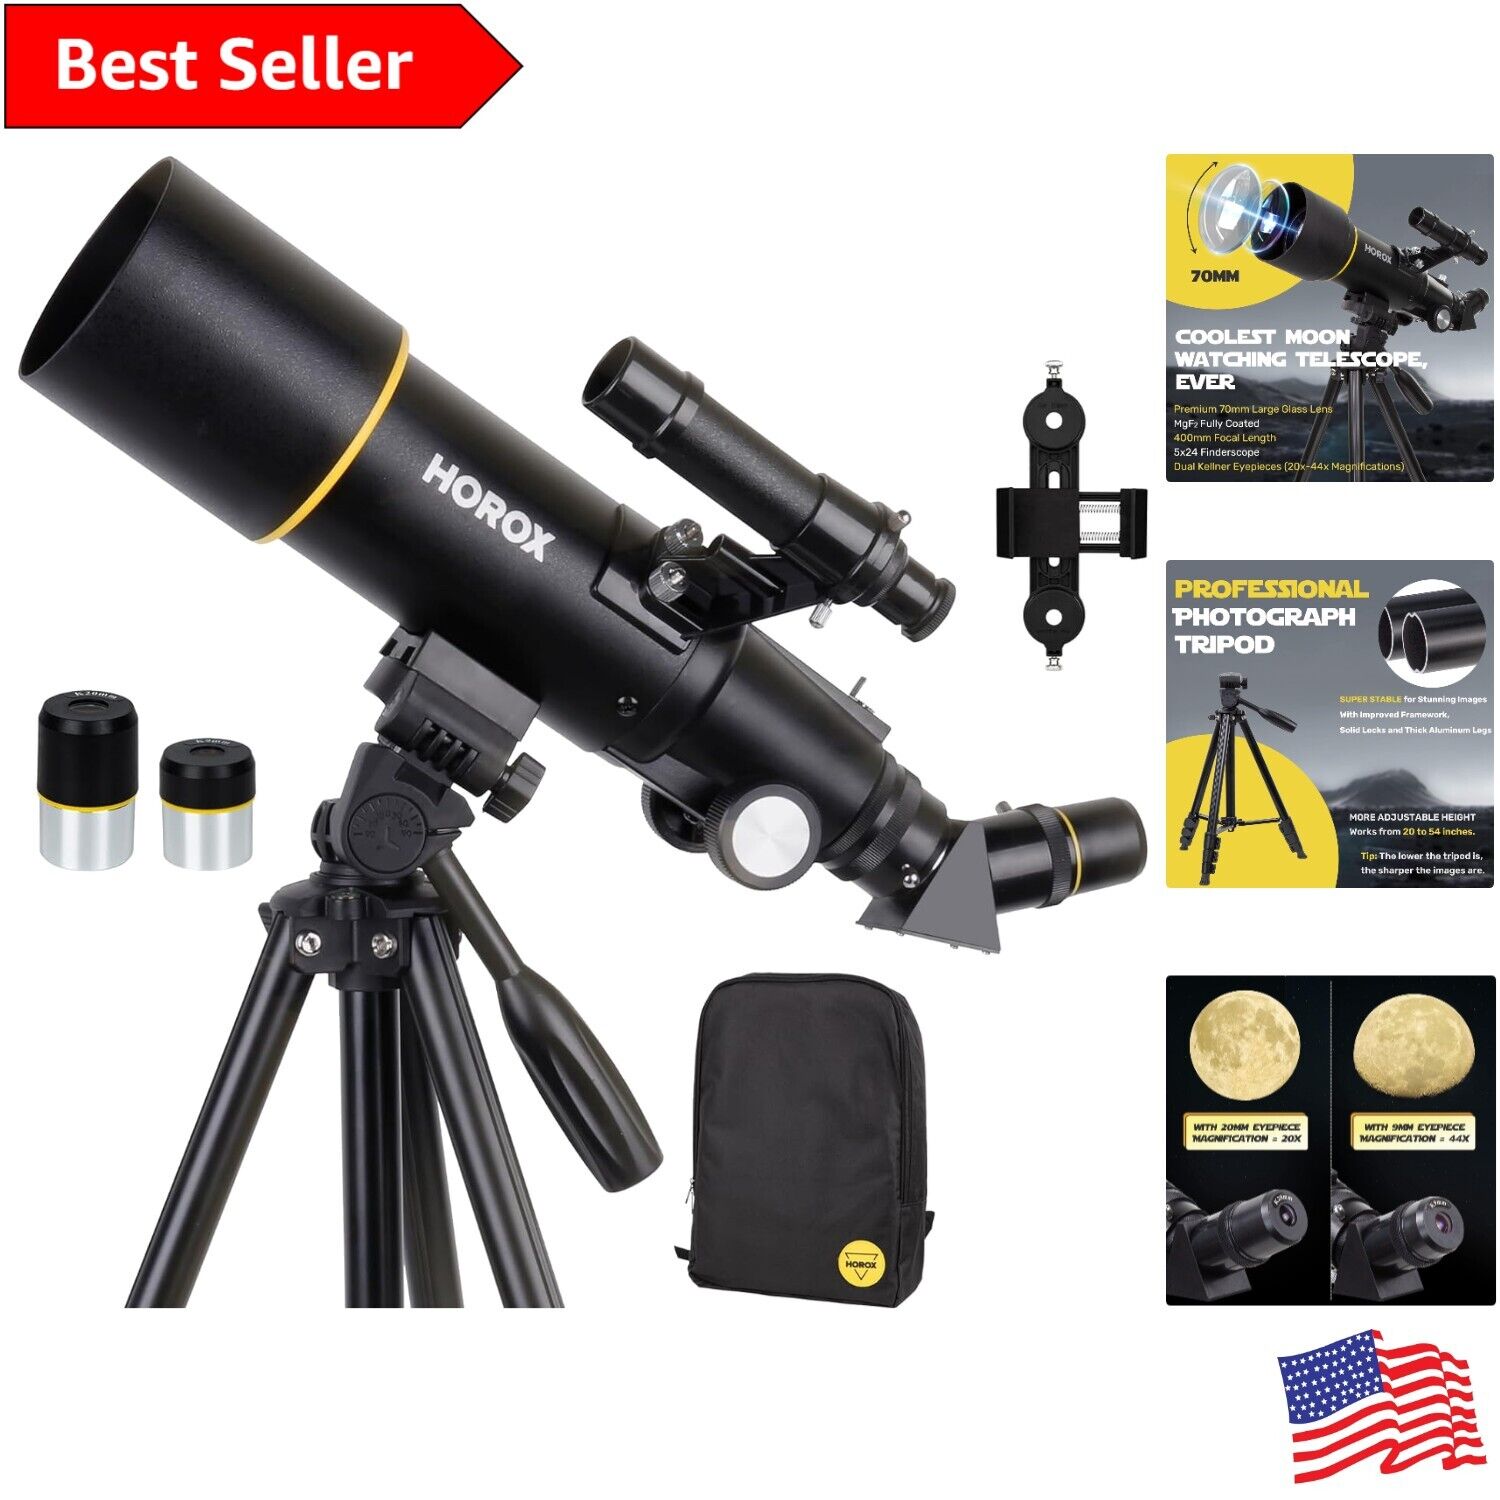 Refractor Telescope for Adults - 70mm Aperture, 400mm Focal Length, Pro Tripod